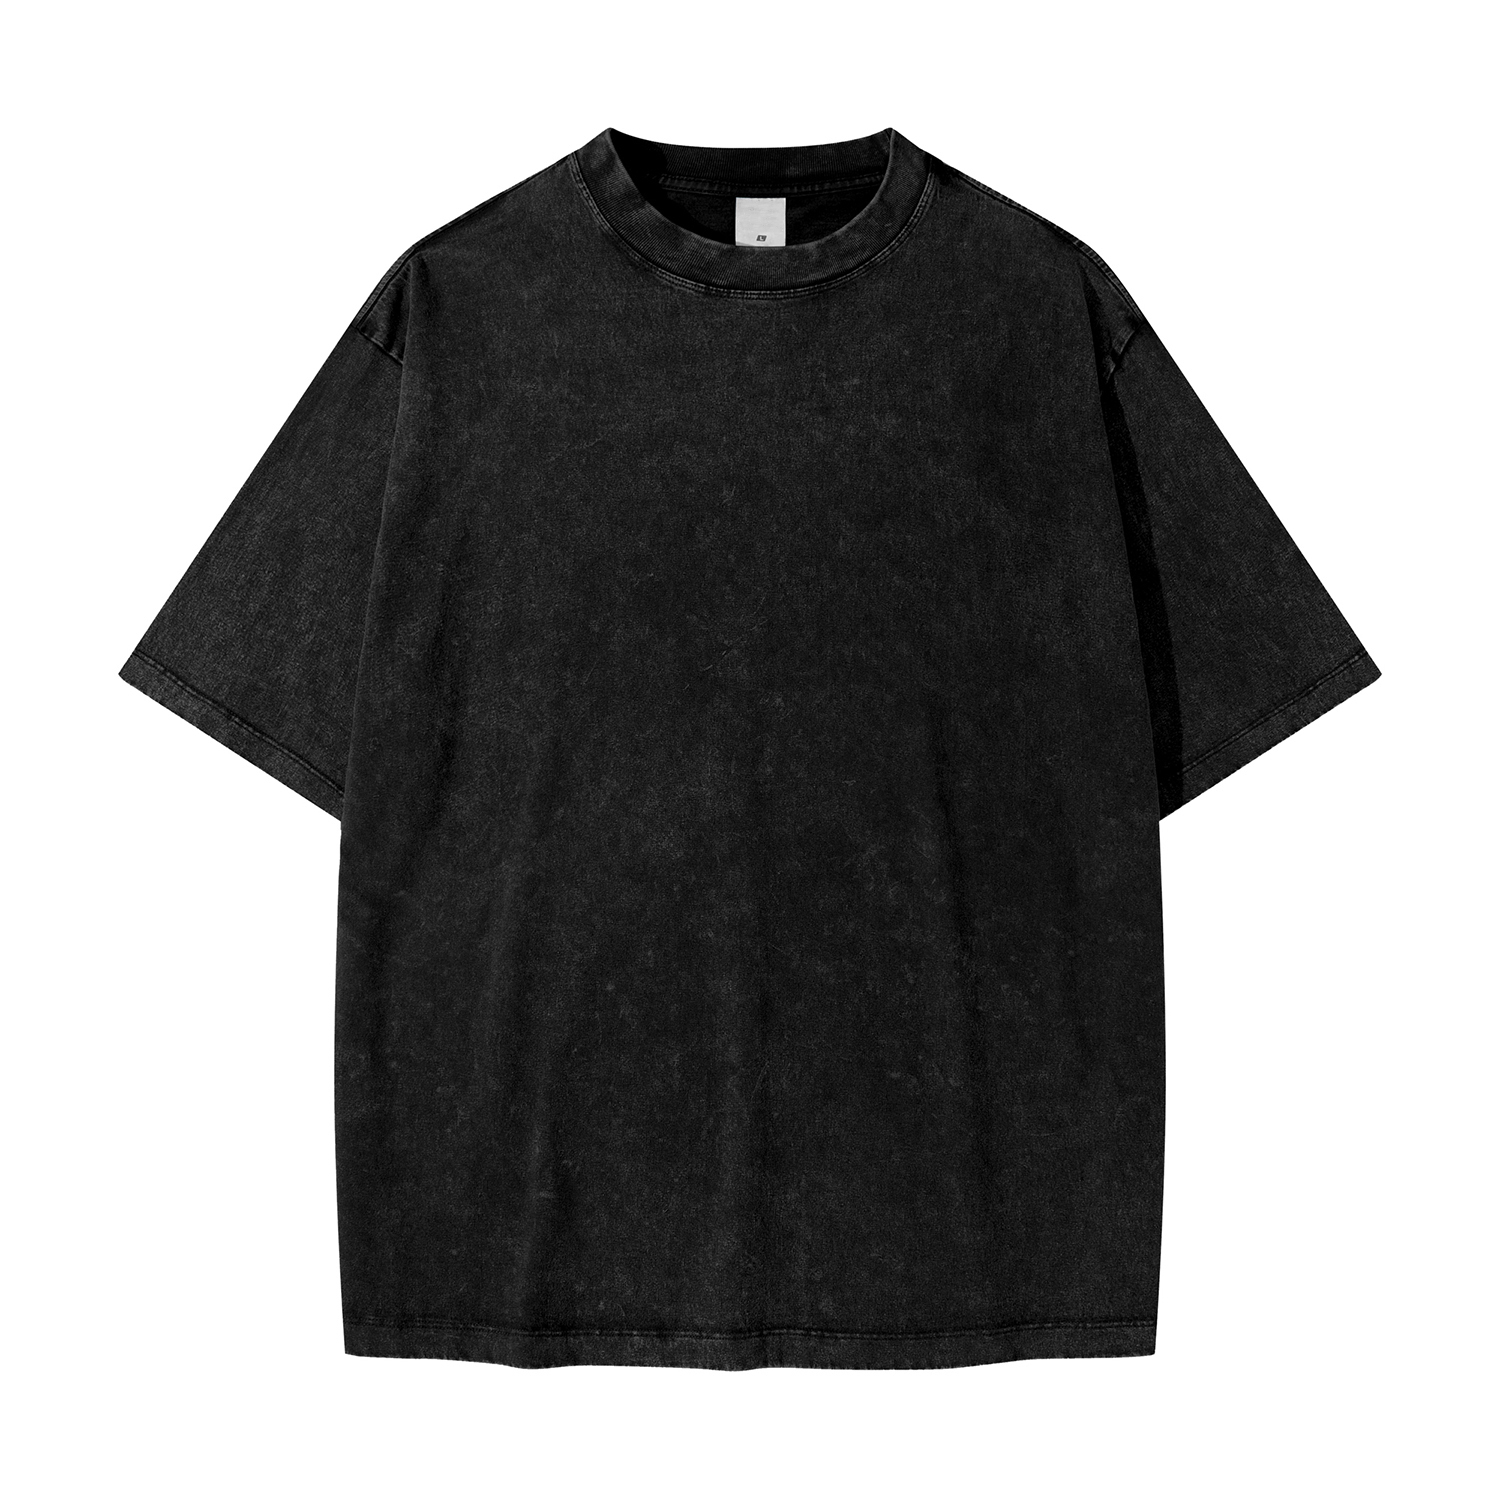 Streetwear American Vintage Waxed Dyed Washed Heavyweight 100% Cotton T-Shirt | HugePOD-18